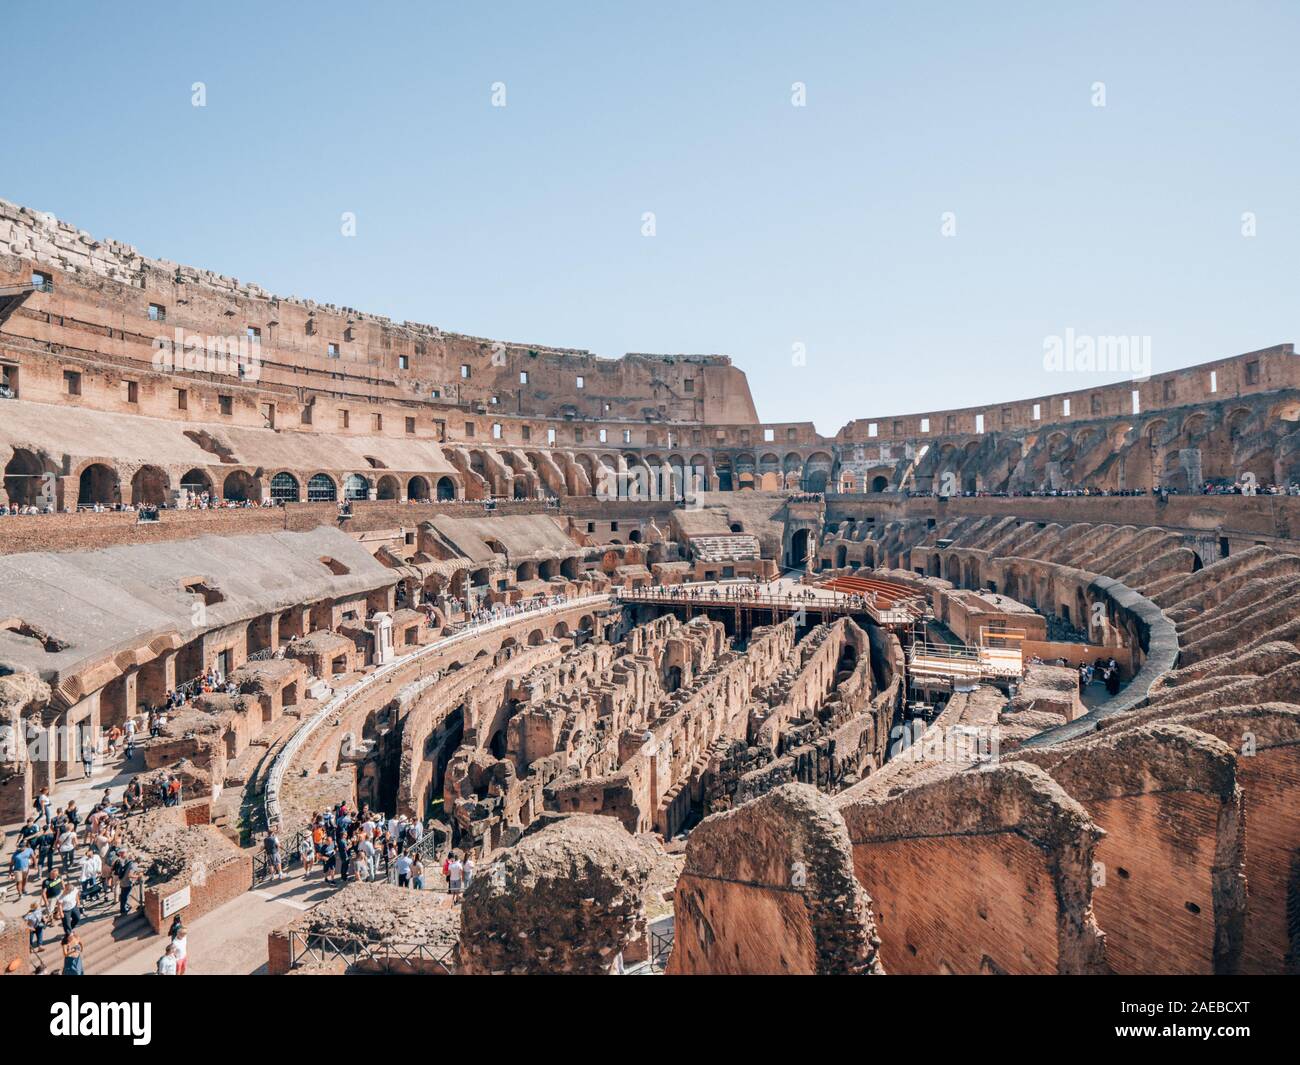 Colosseum in Rome, Italy Stock Photo